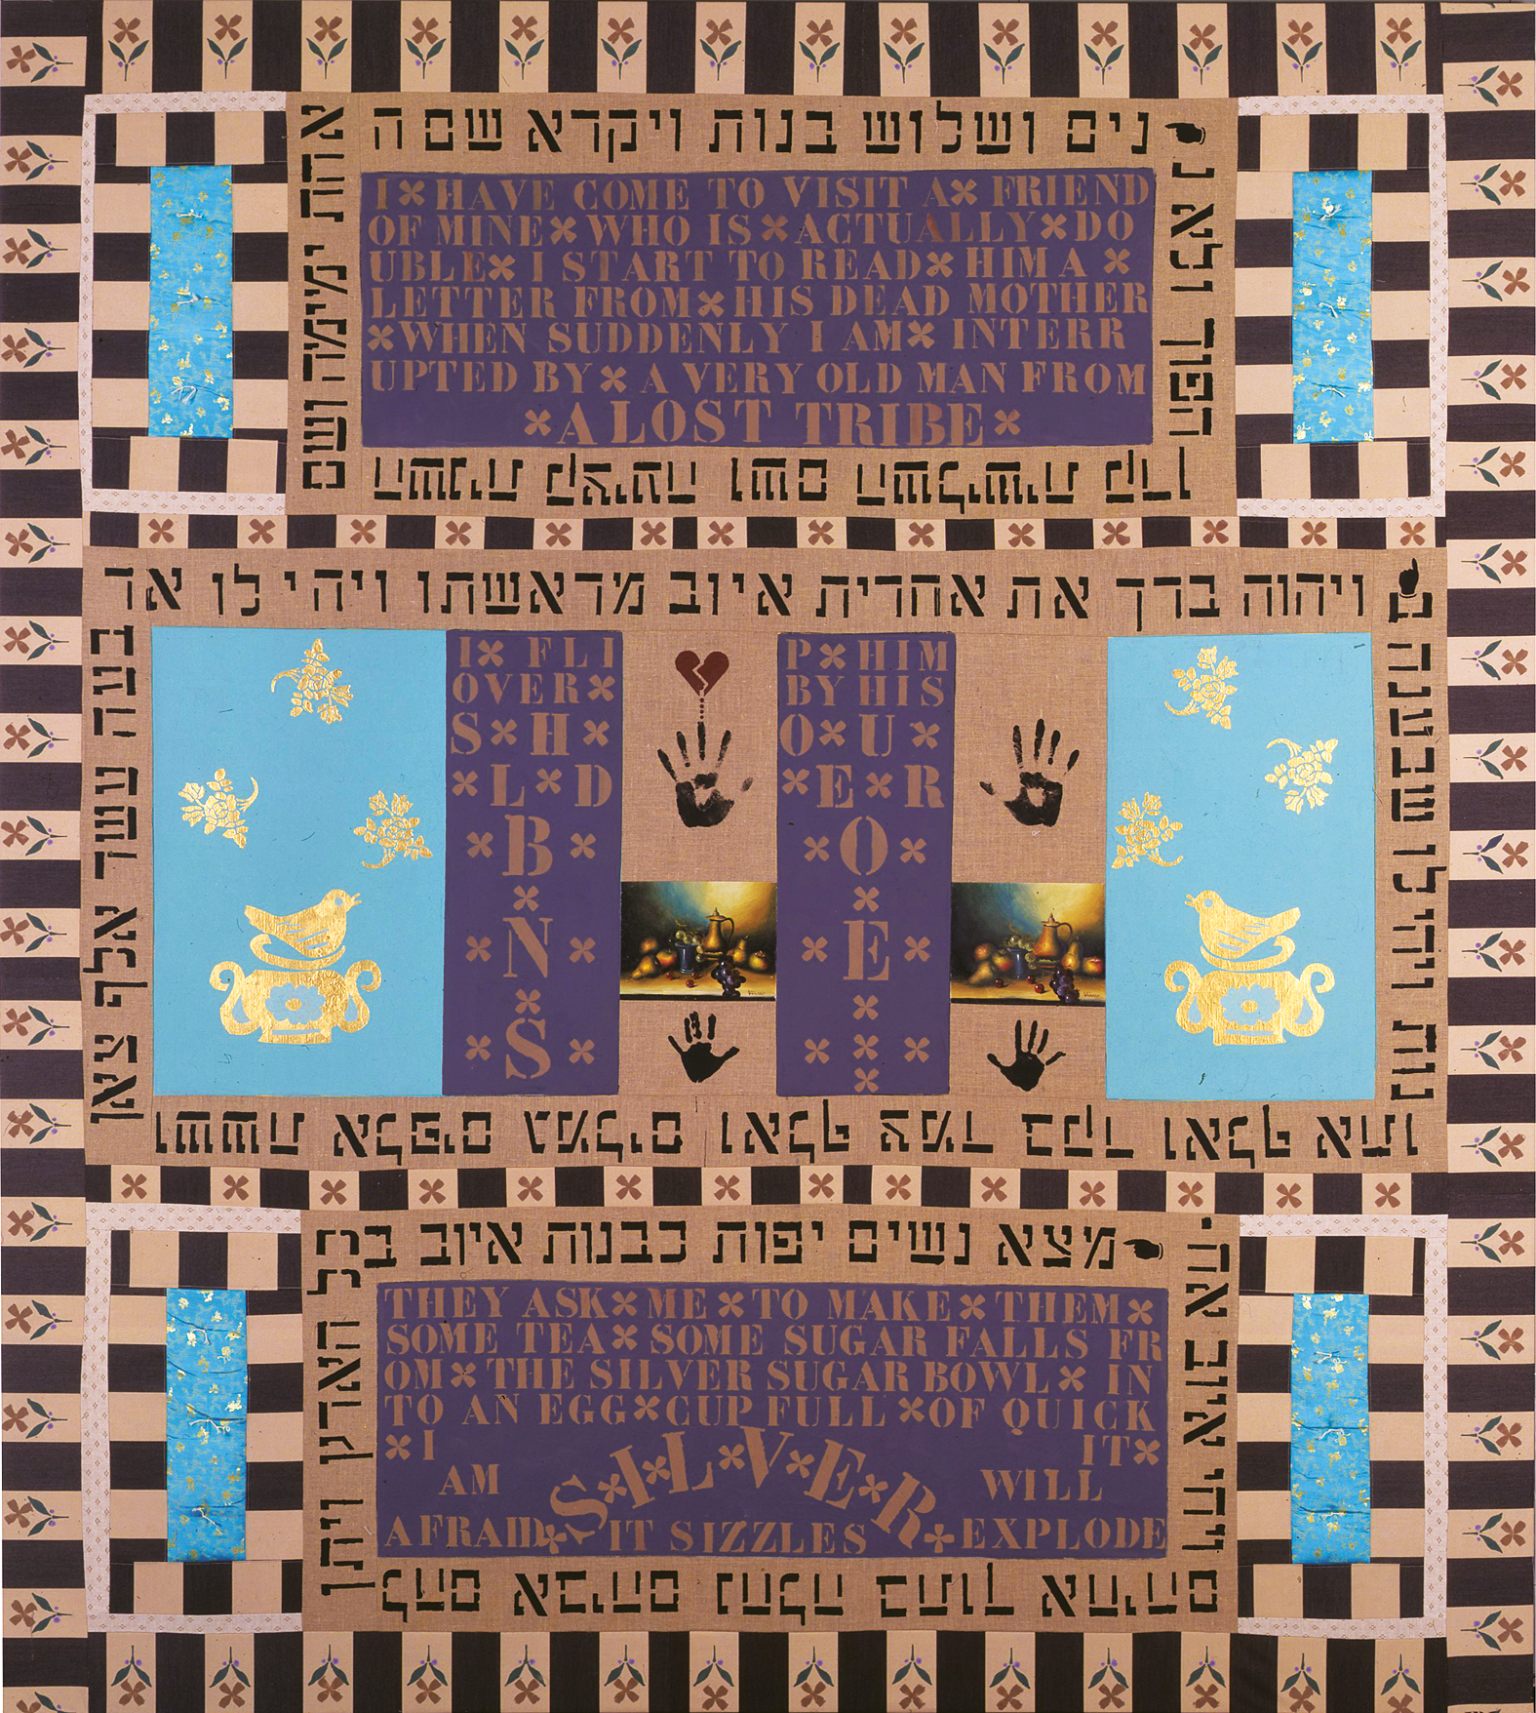 Mixed media work featuring English and Hebrew text in frames of rectangles throughout work, still life in center rectangle surrounded by hand prints and broken hearts, decorative motif on either side of still life, and floral border.